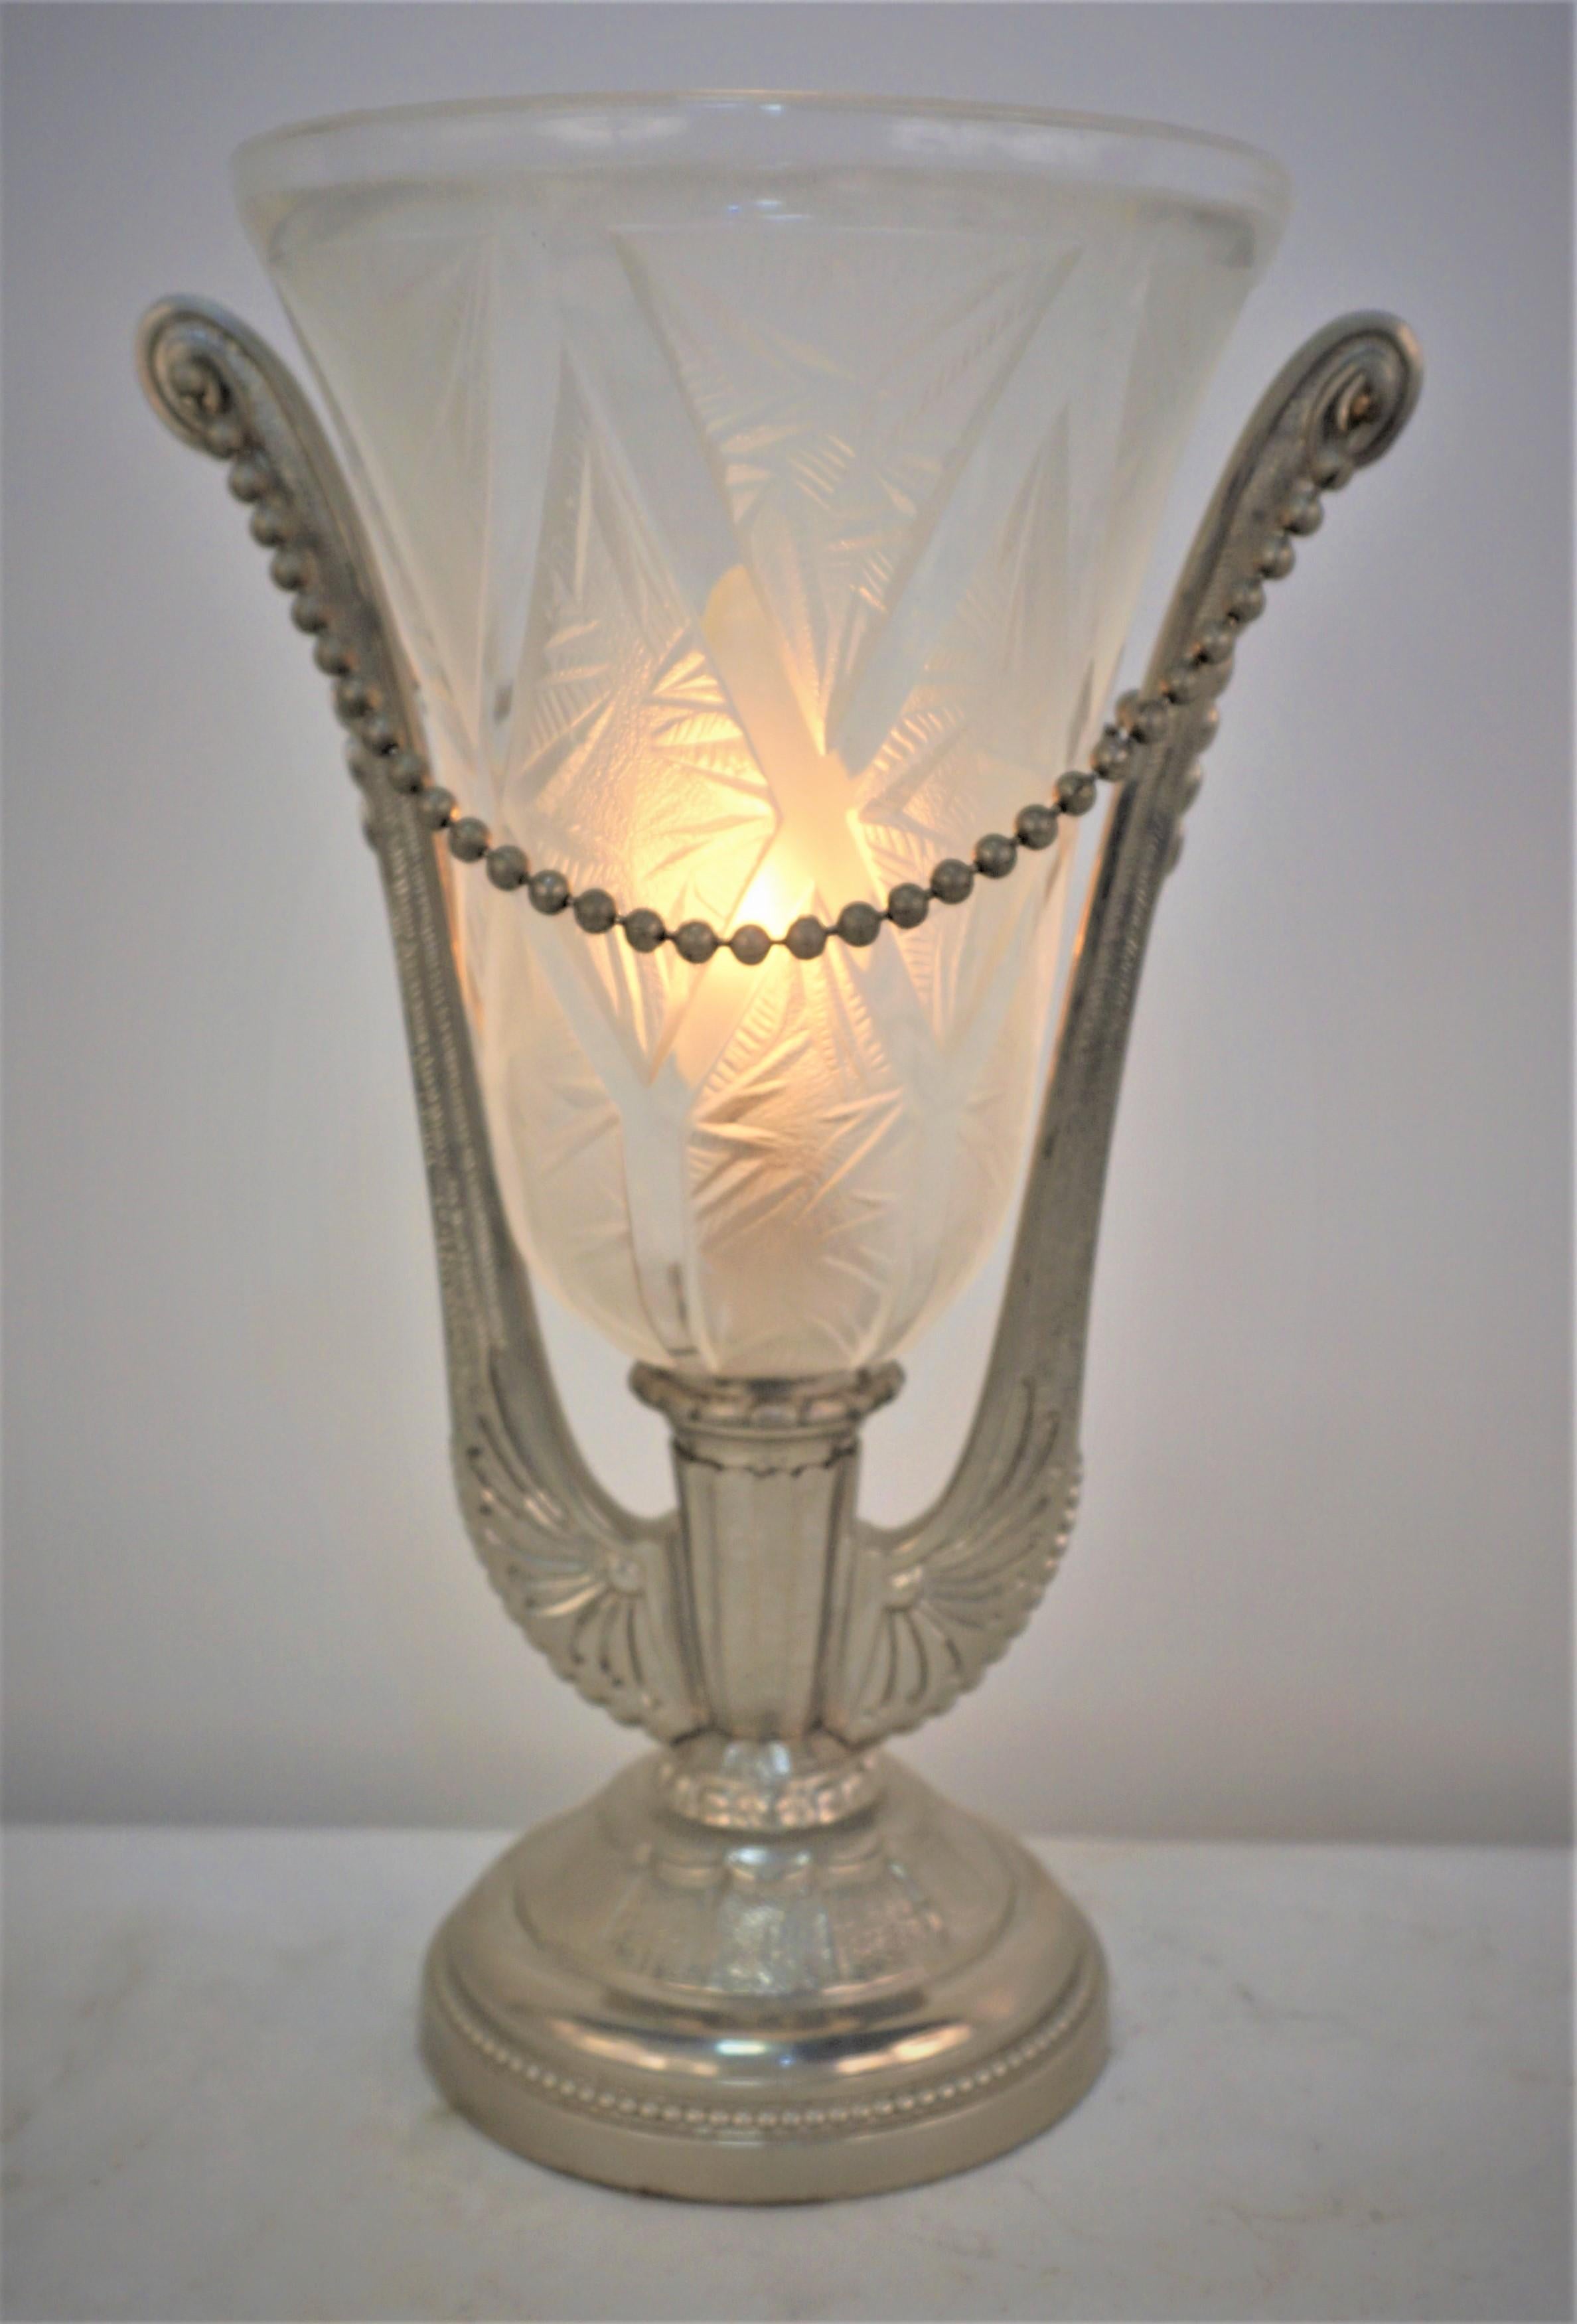 Torchiere style clear texture frost glass shade with nickel on bronze base 1930's table lamp by Verrerie des Hanots.